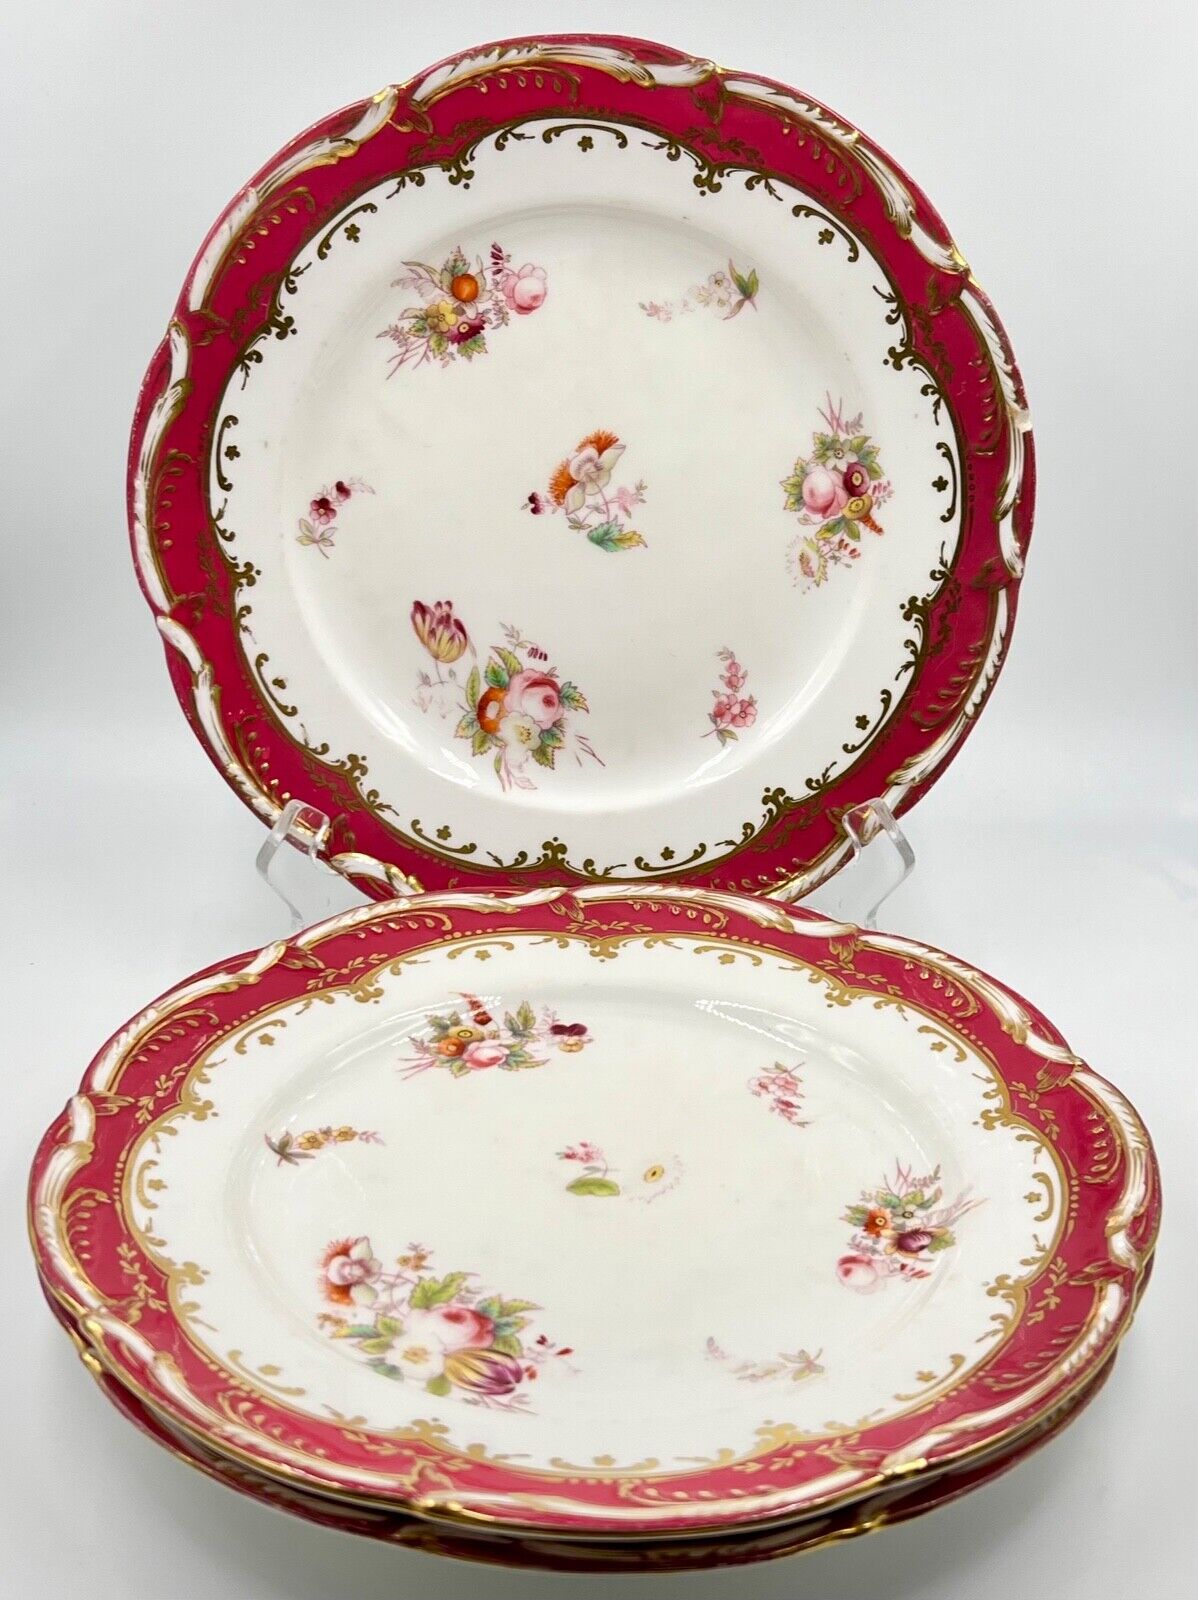 SET OF 3 FINE EARLY 19th CENTURY UNMARKED ANTIQUE FLORAL DINNER PLATES; 791